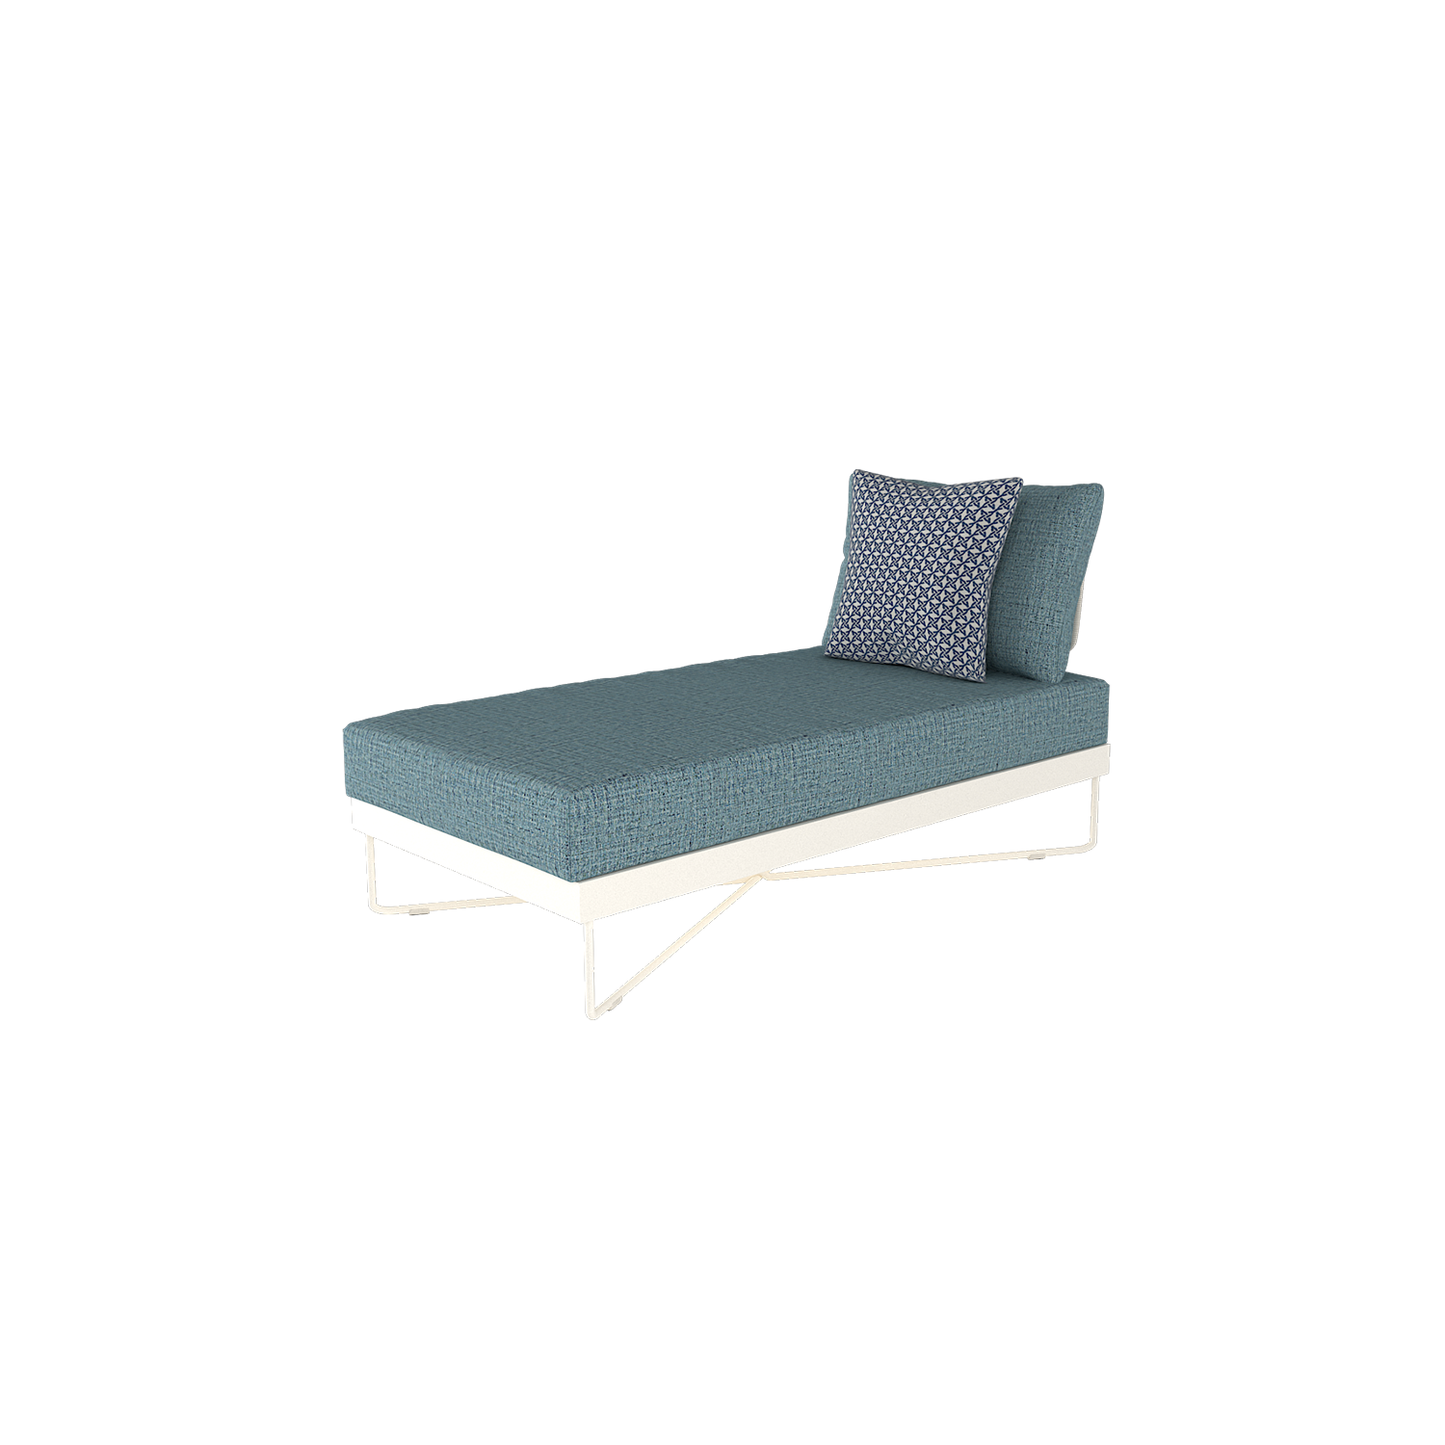 Coral Reef Chaise Lounge with Sunloom Back | Roberti | Outdoor Lounge chairs | coral-reef-lounge-chaise-lounge